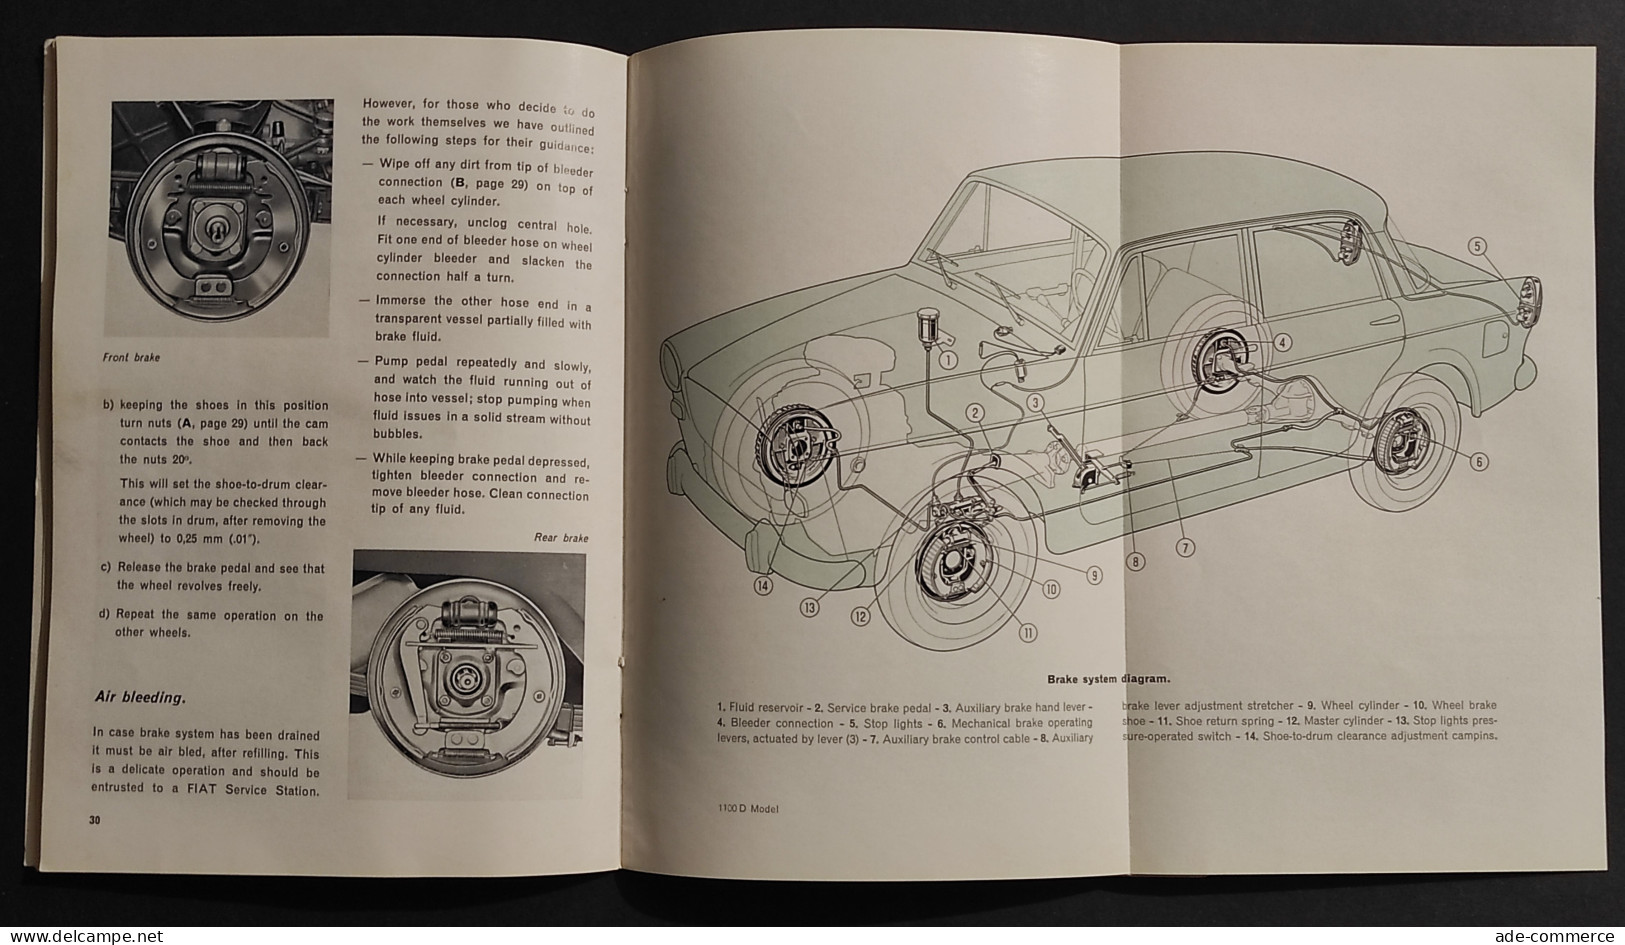 Fiat 1100D Instruction Book - Maintenance-Specifications - 2^ Ed. 1963 - Engines